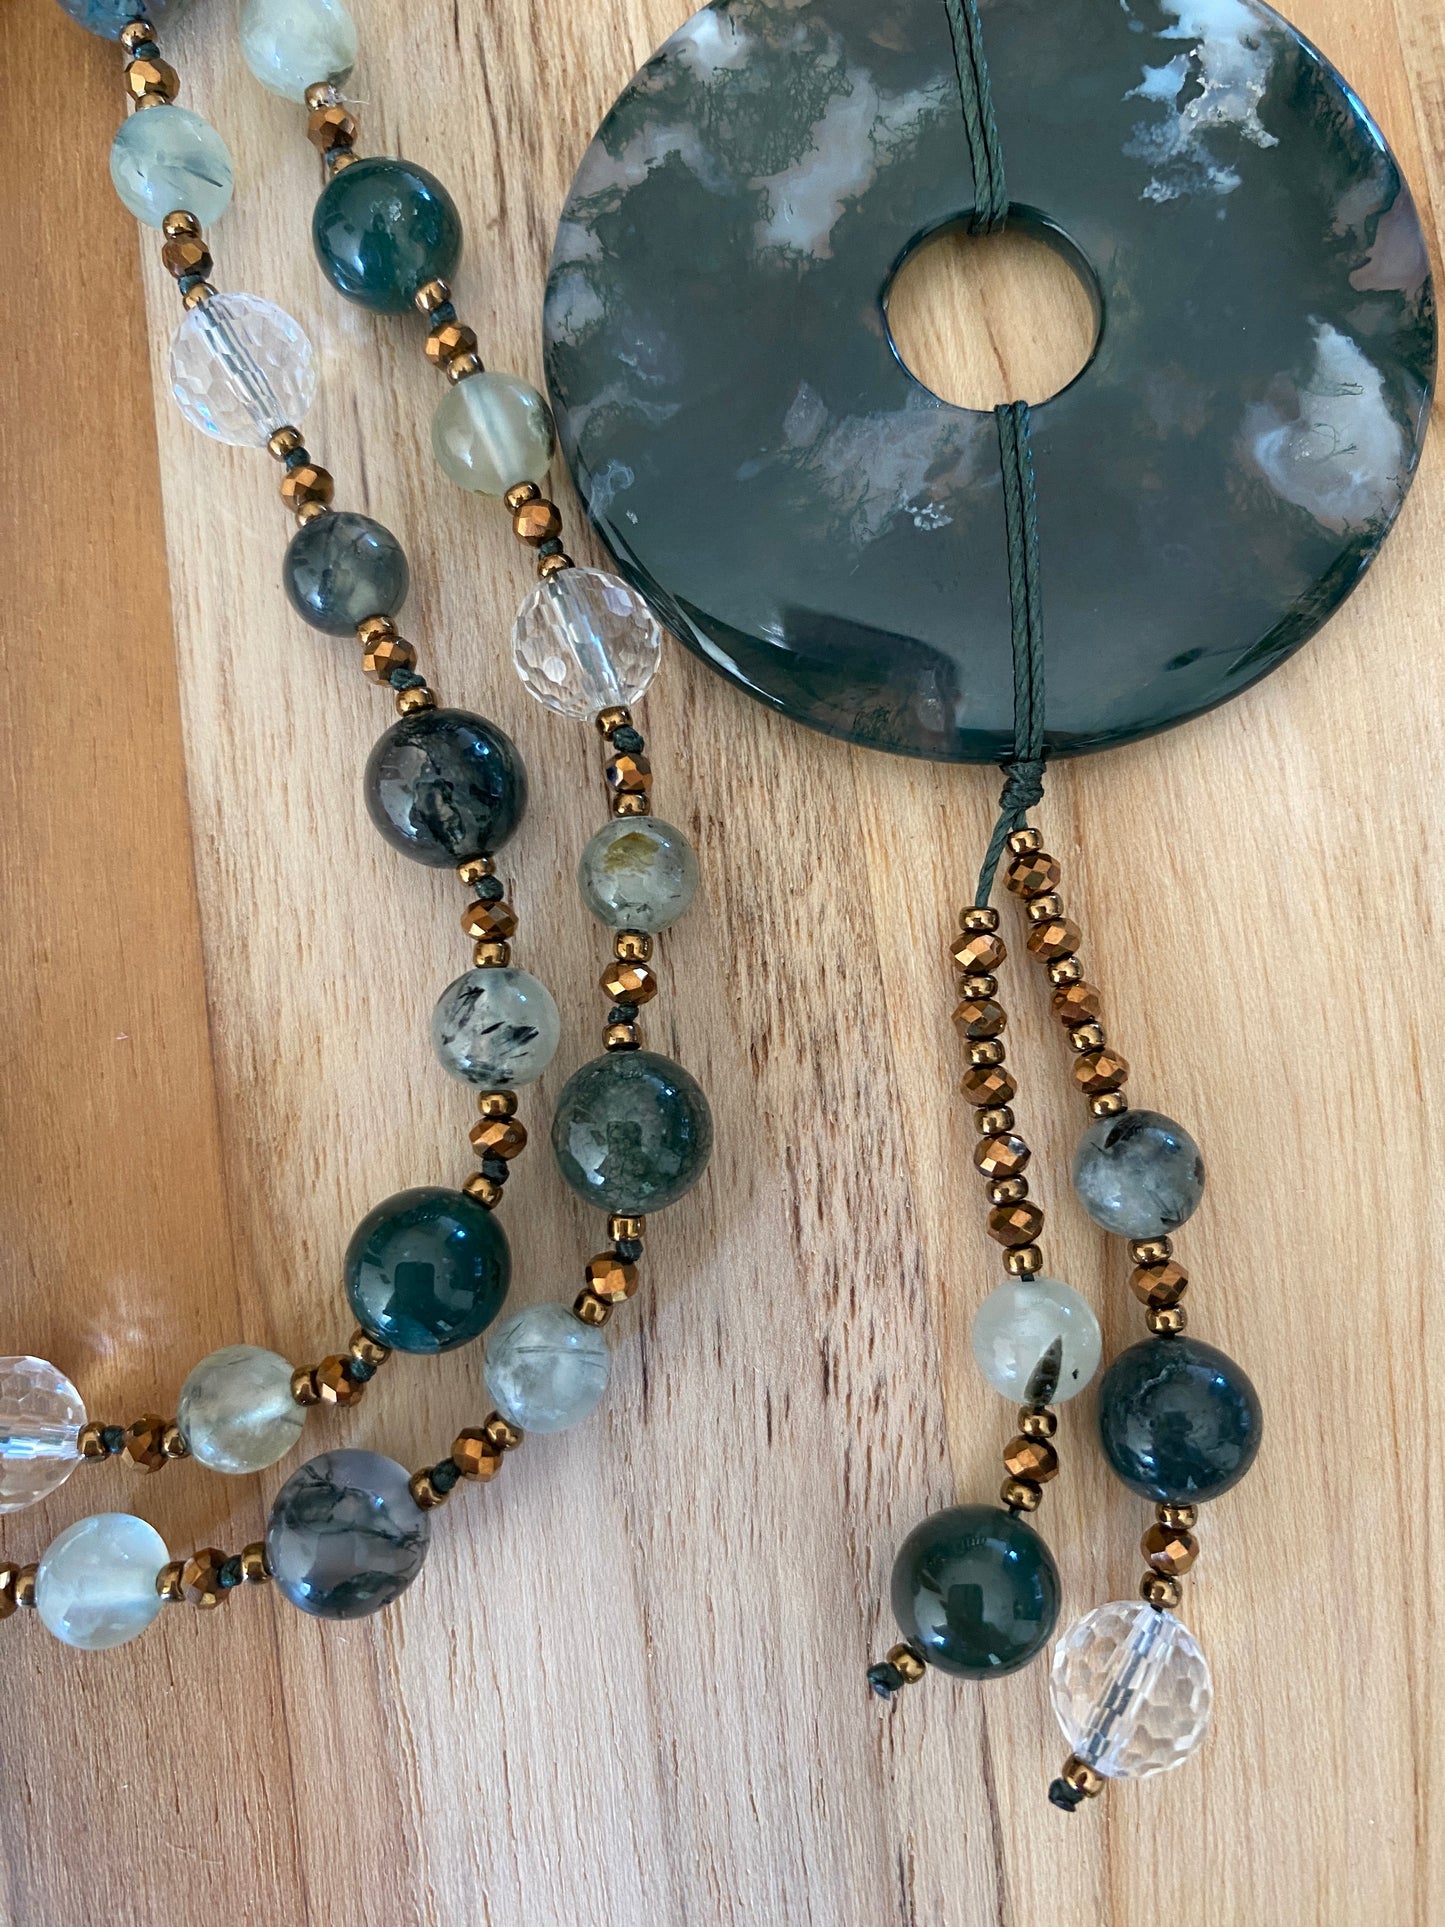 Green Moss Agate Donut Pendant Necklace with Moss Agate Prehnite and Clear Quartz Beads